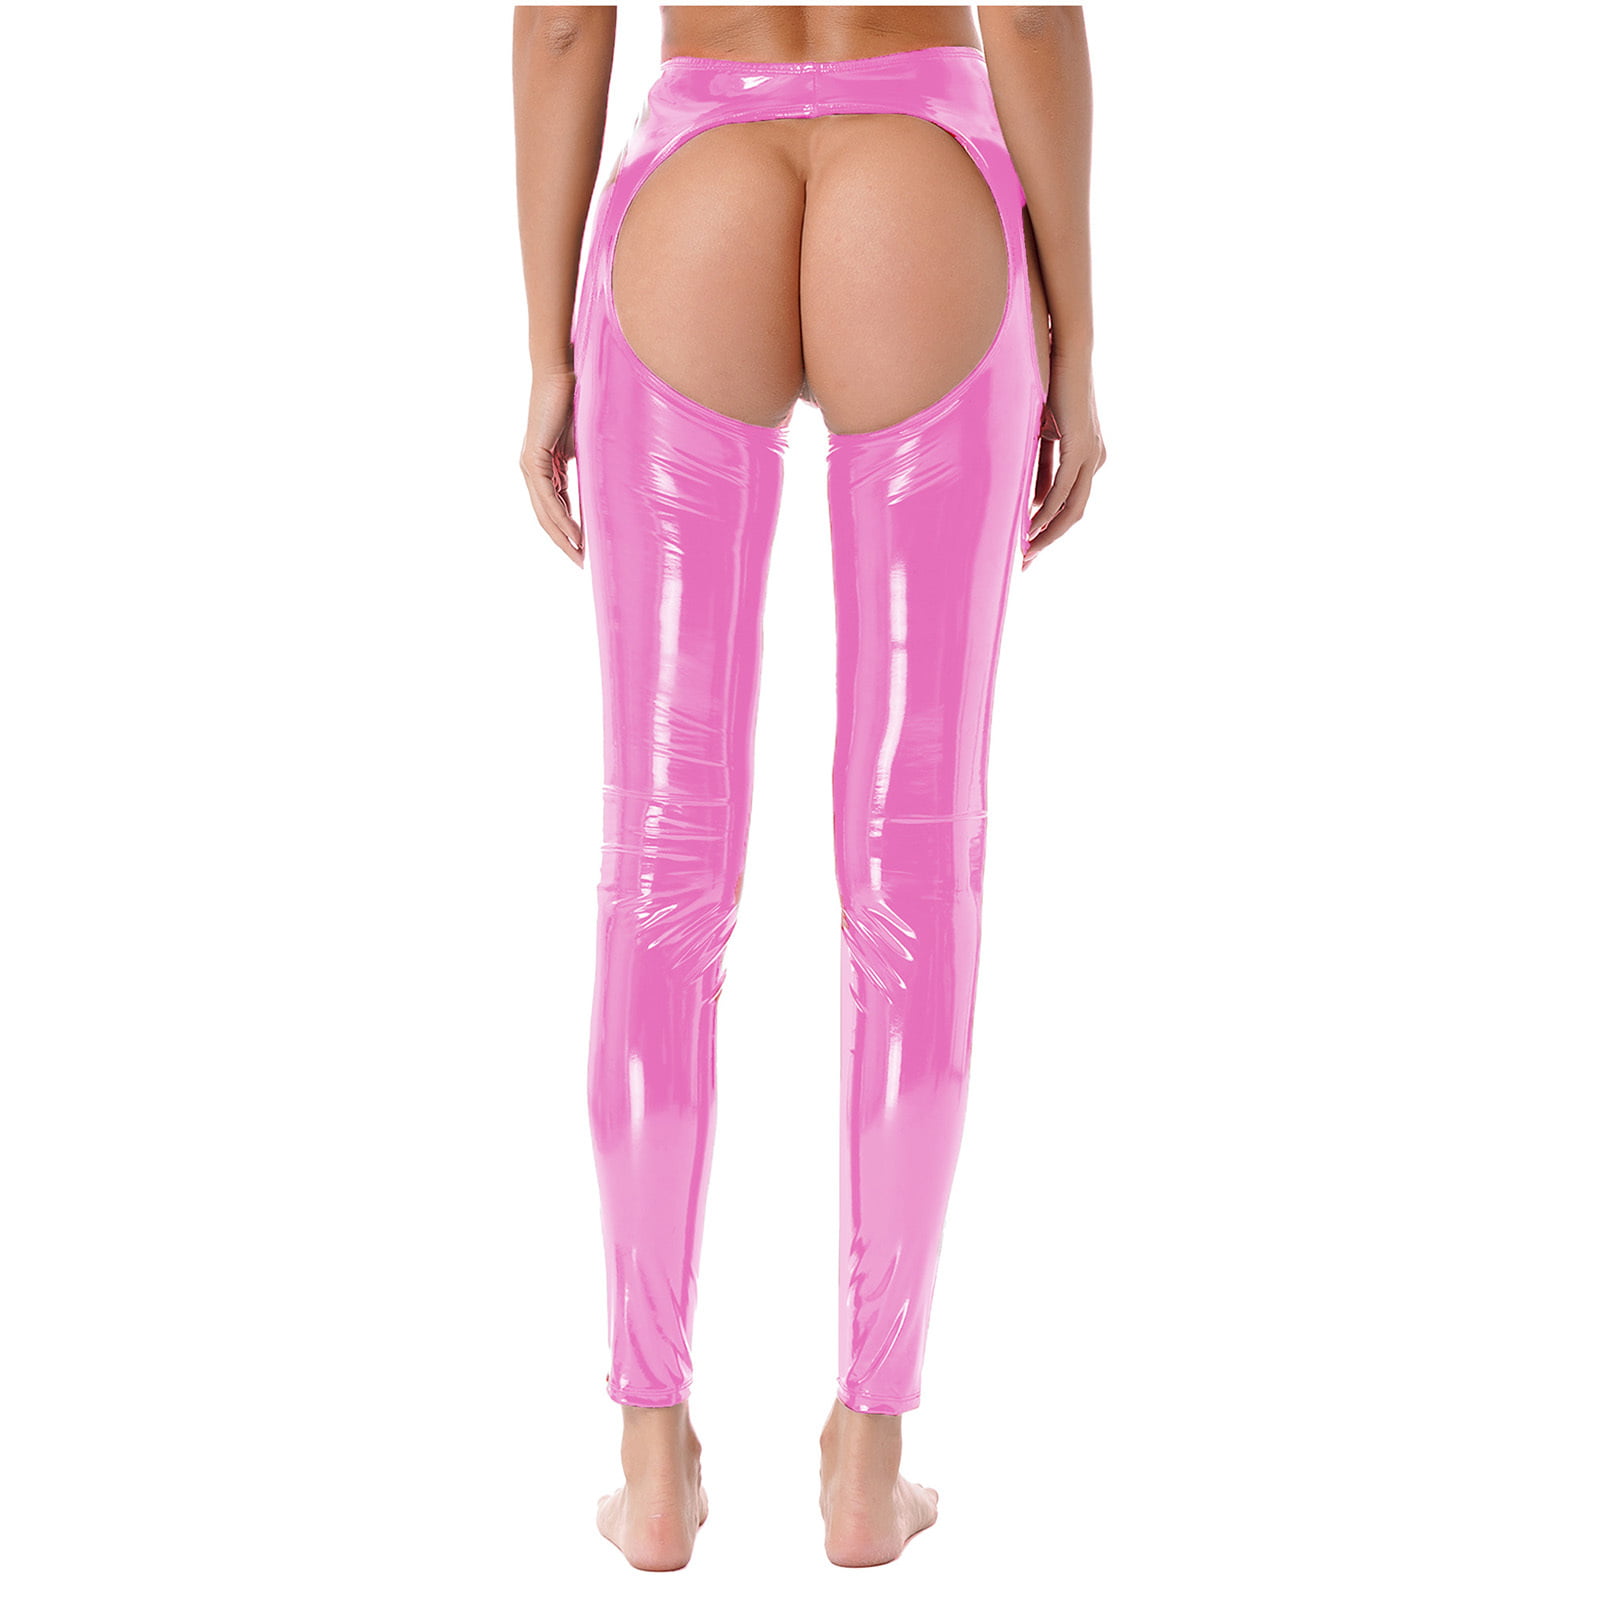 YONGHS Women's Patent Leather Hollowing Out Bottoms Leggings Long